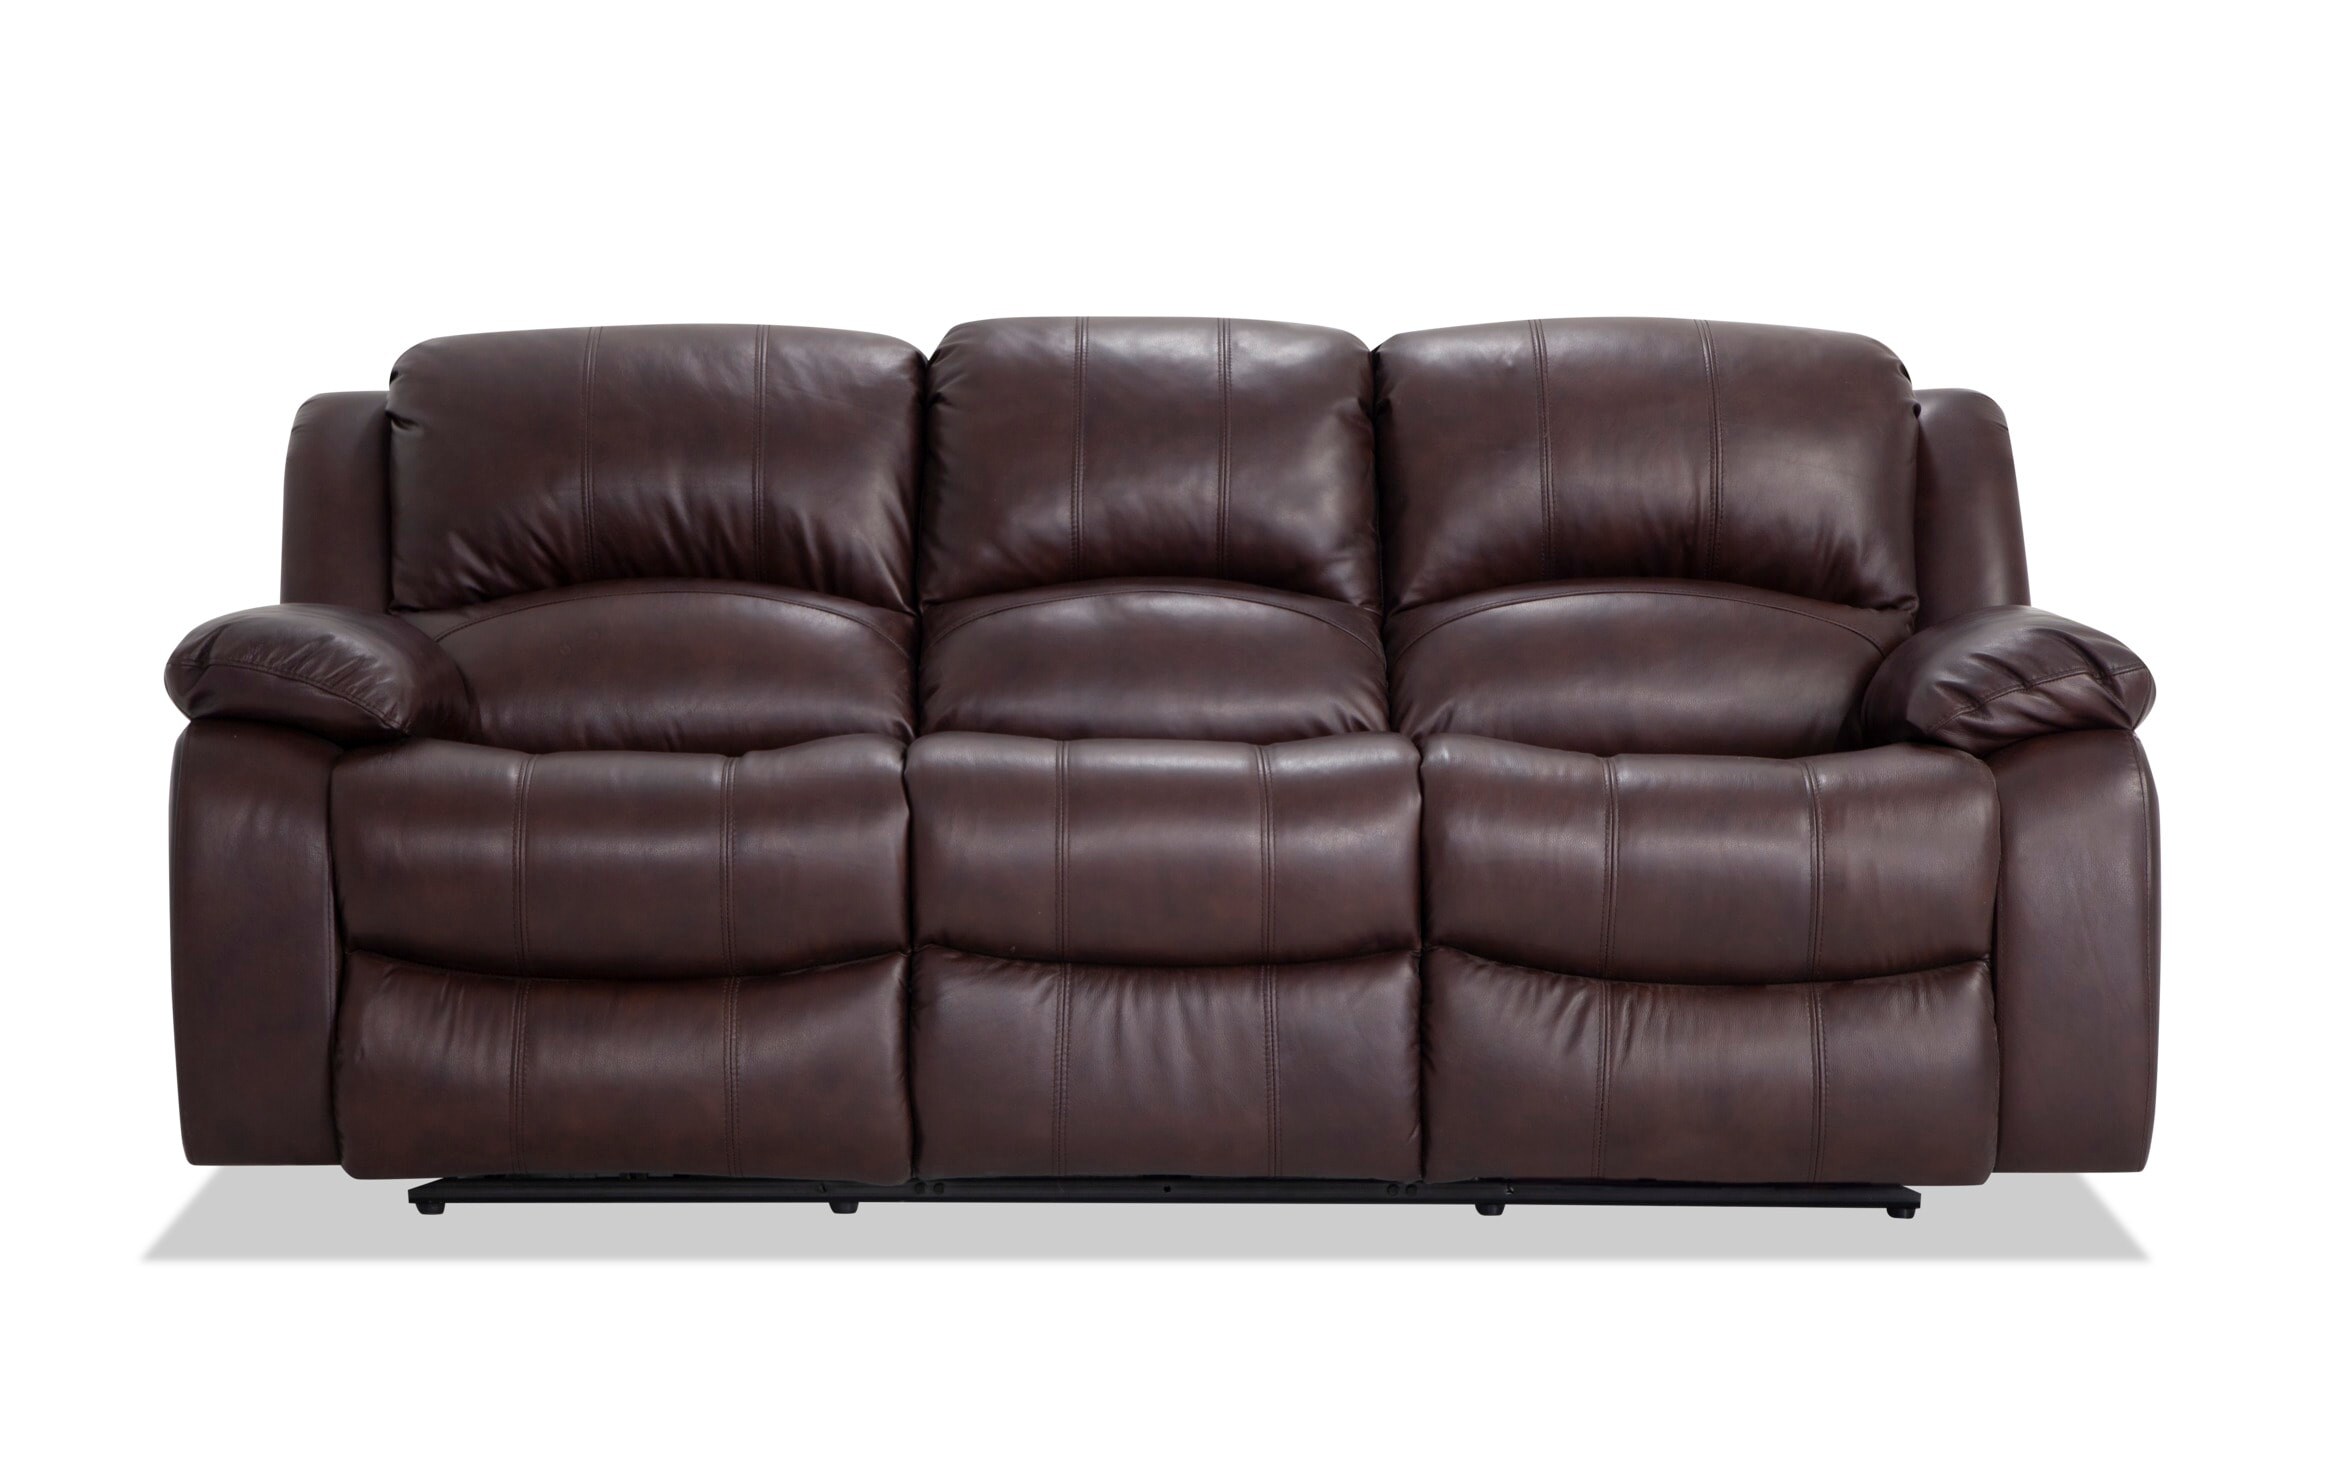 Olympus Brown Leather Power Reclining, Brown Leather Reclining Couch